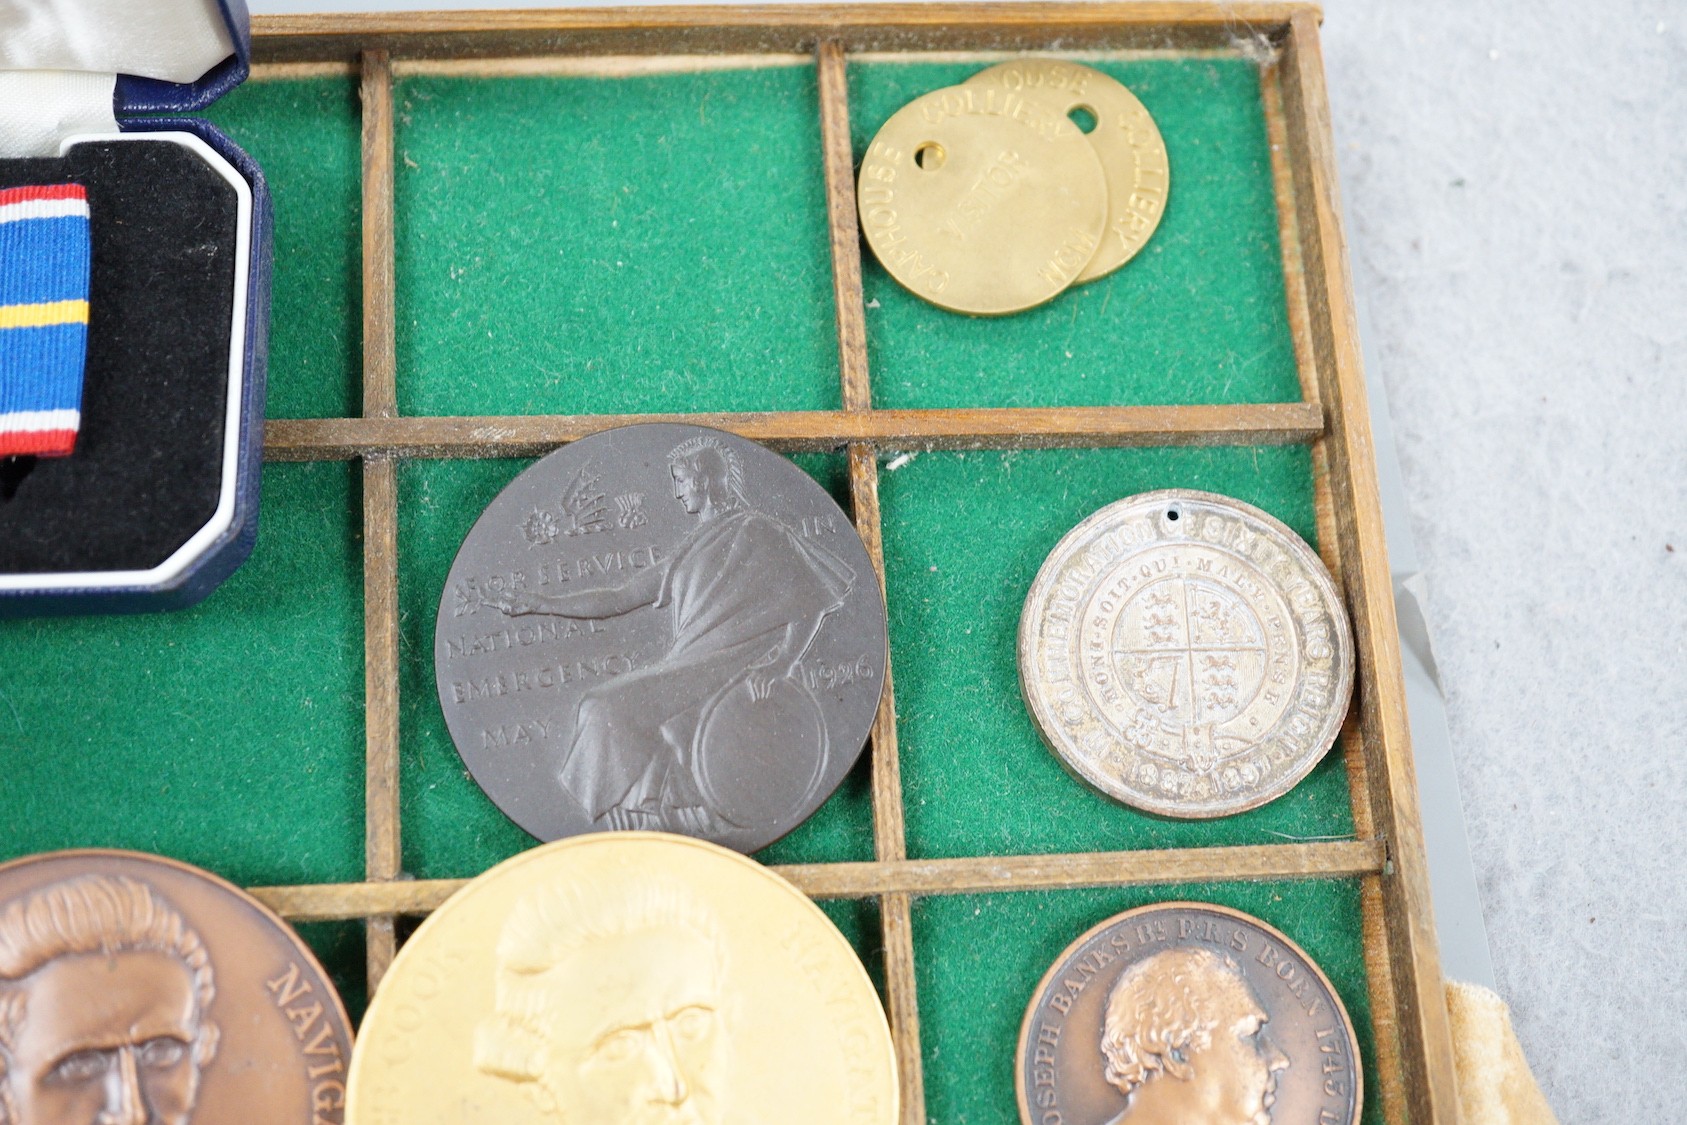 British, French, Australian commemorative medals and badges, to include Nelson, Admiral Vernon, Napoleon, Credit Lyonnaise, French Republic 5 sols 1792, Australia’s 150th anniversary celebrations 1938, Primrose League et